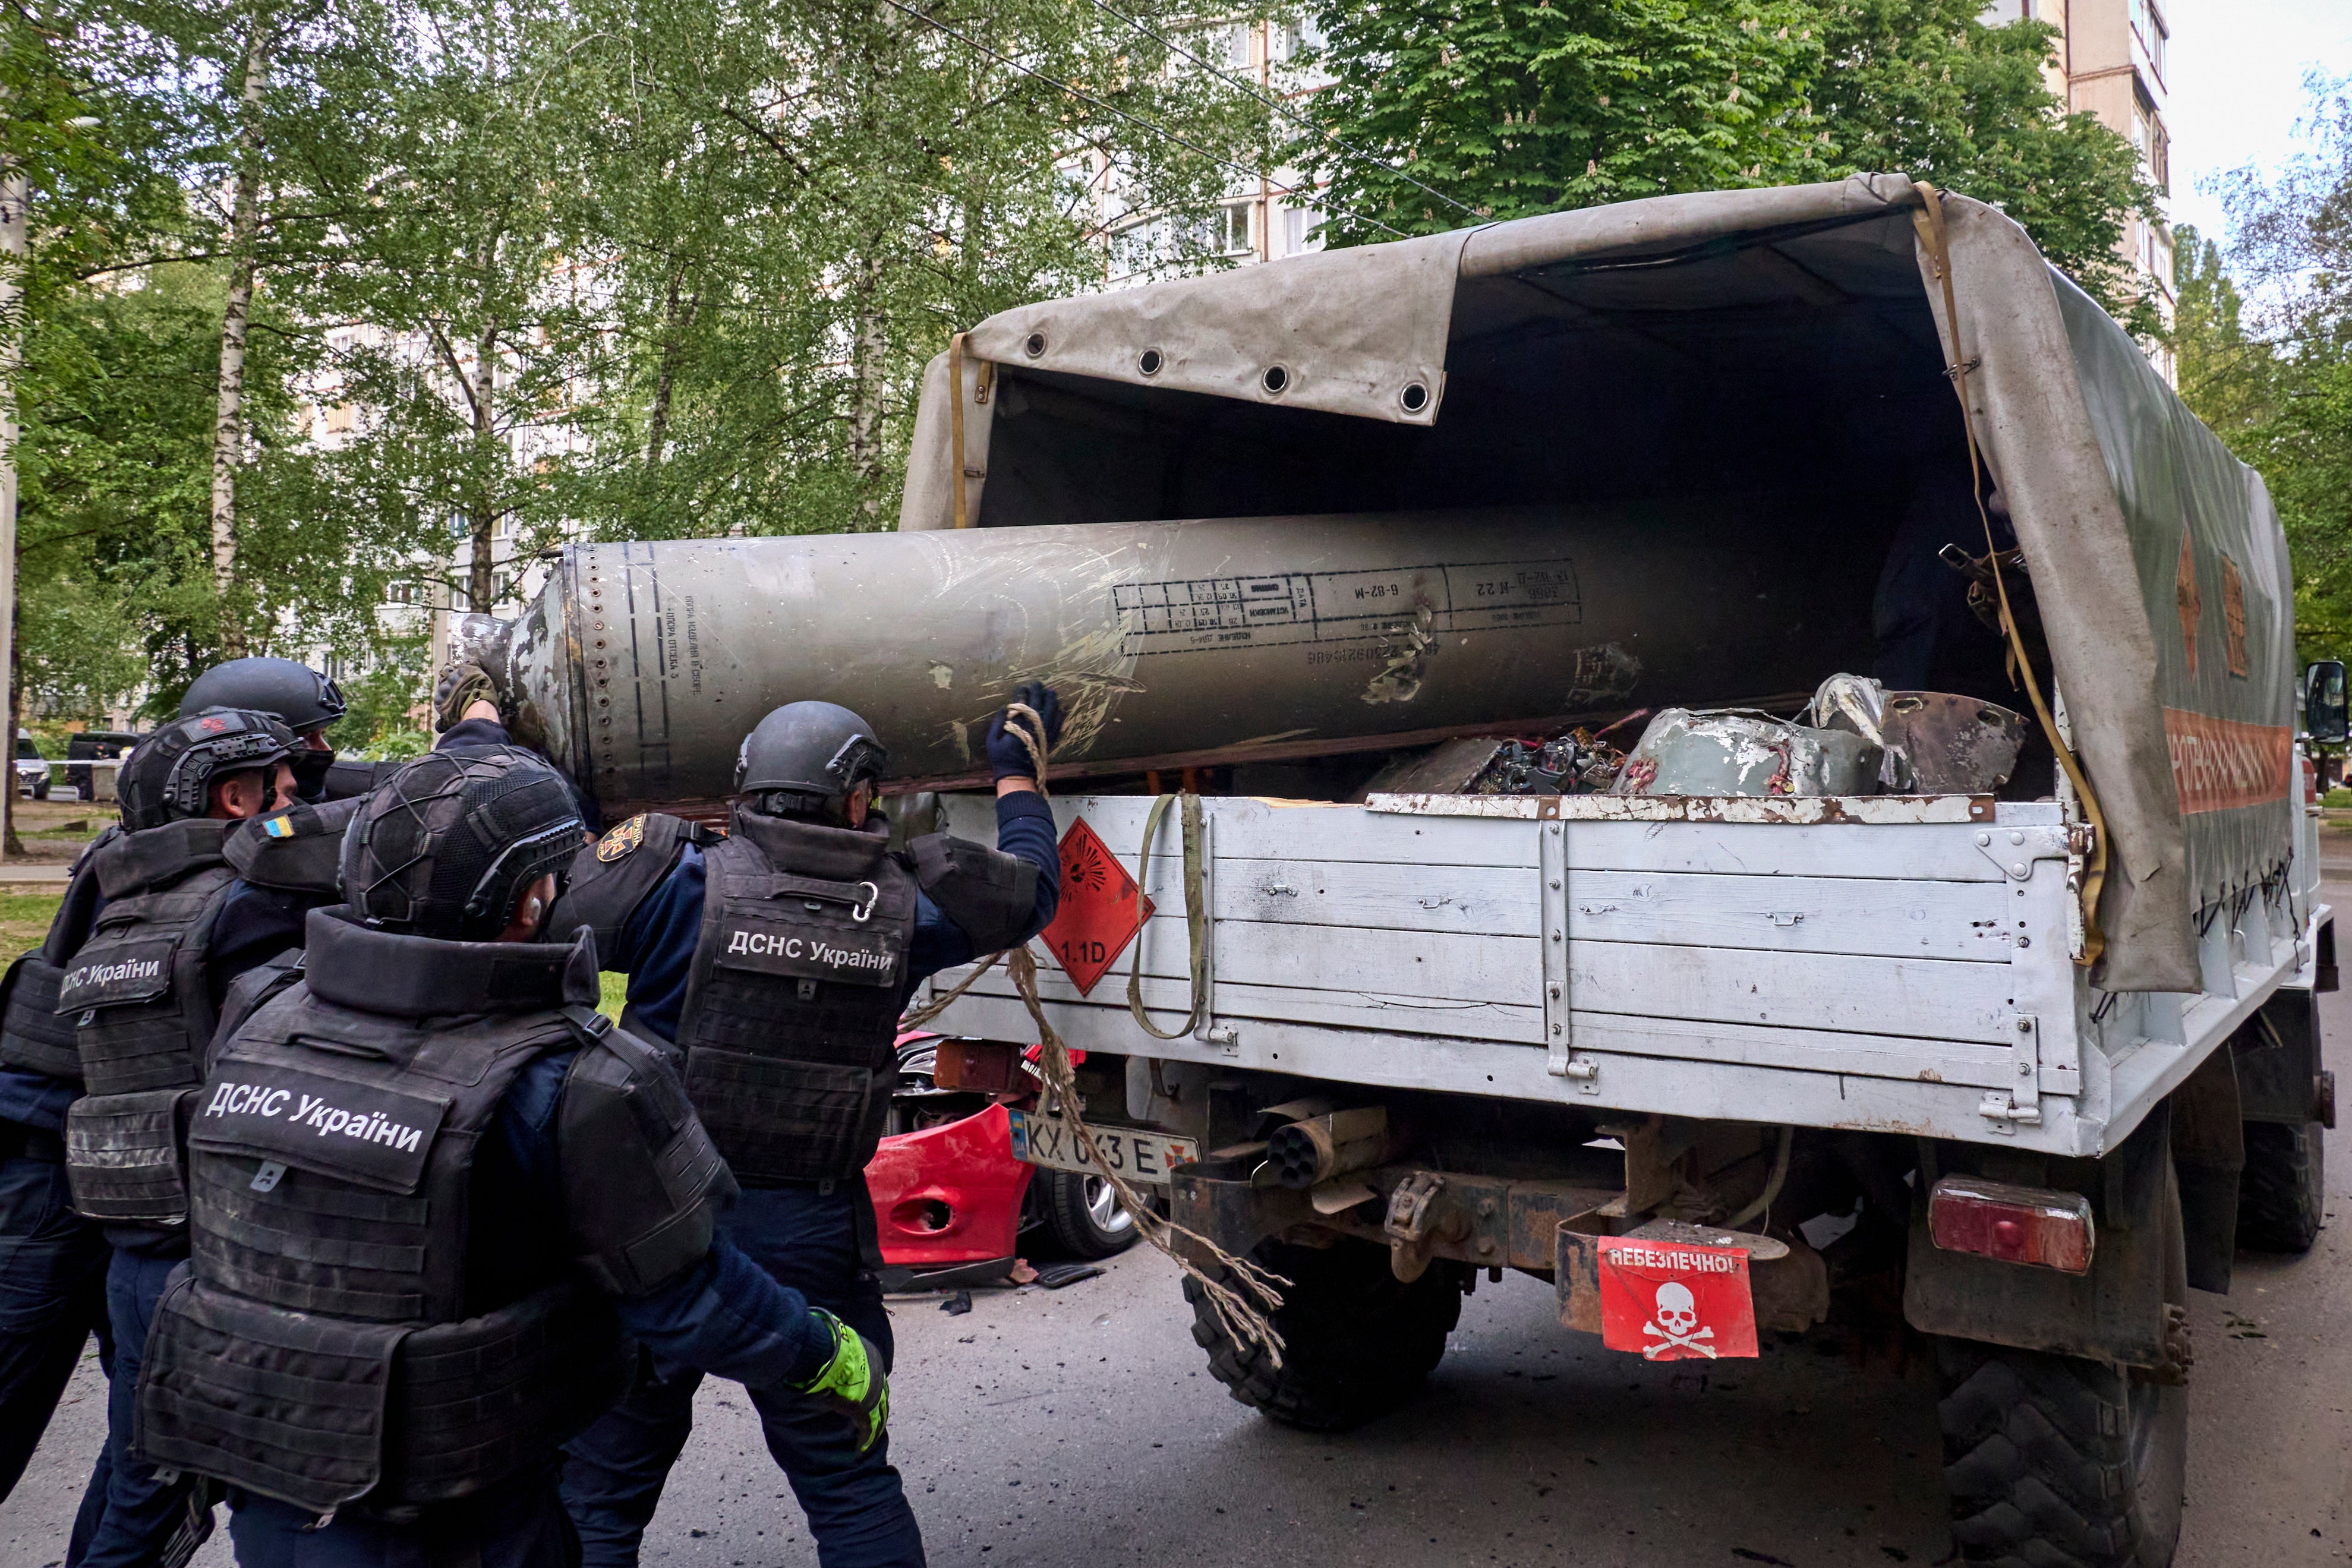 Ukrainian rescuers load debris of a Russian S300 missile into a truck after the shelling of residential area in Kharkiv